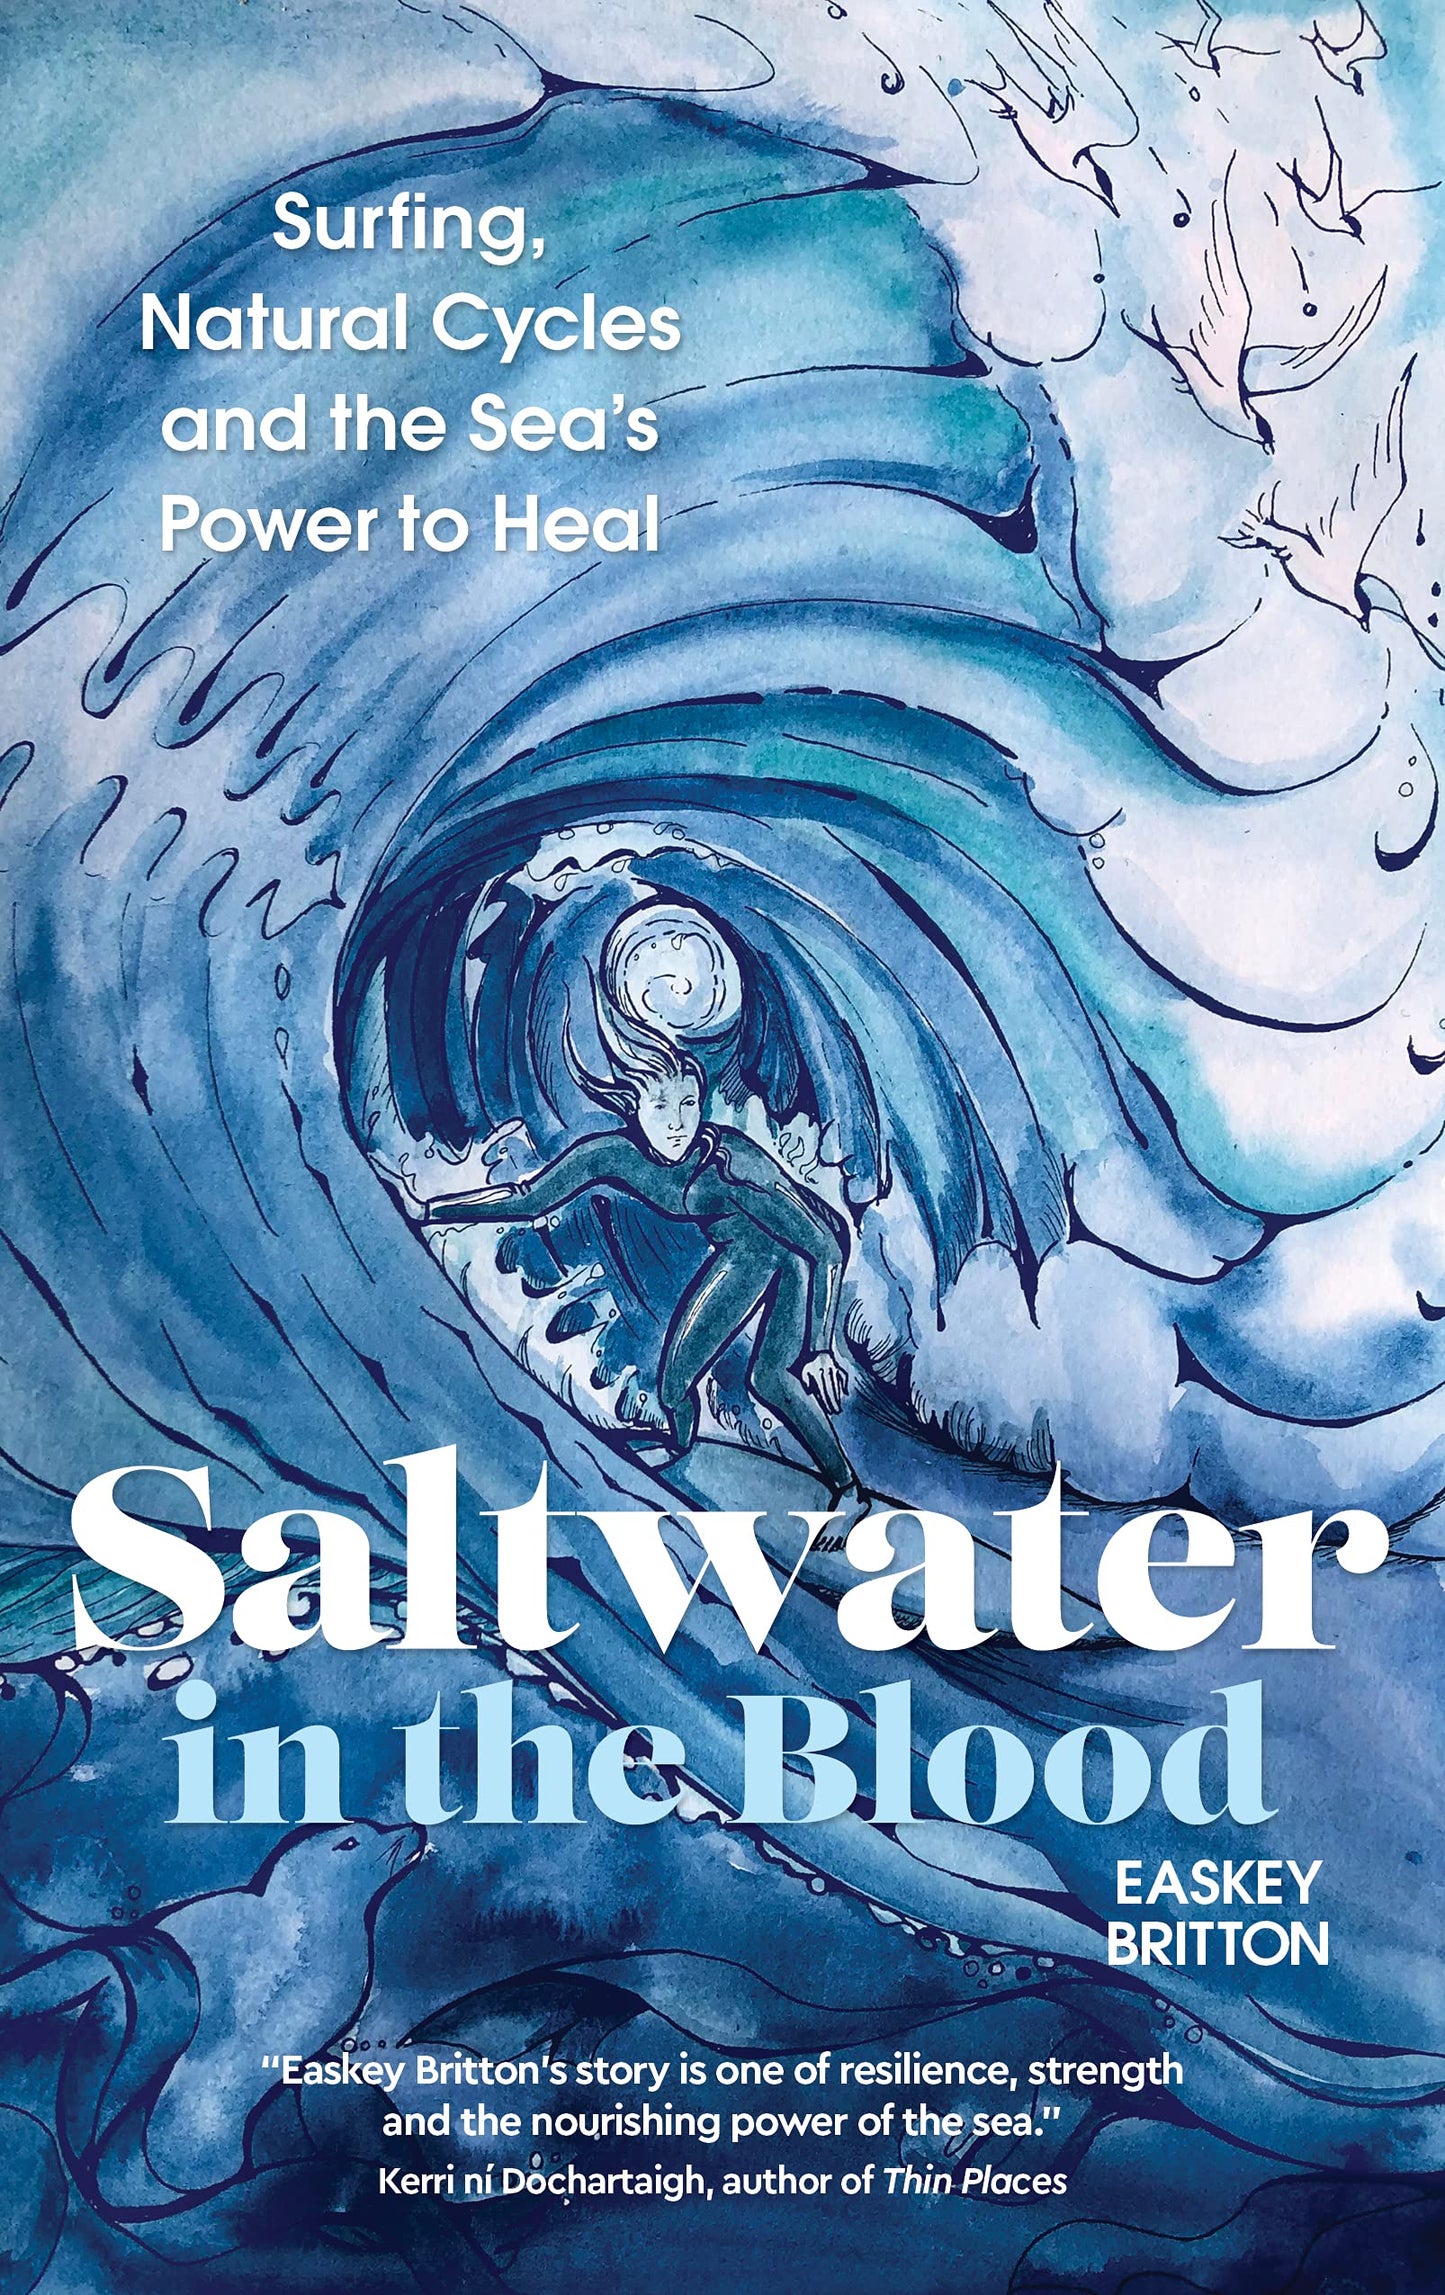 Saltwater in the Blood by Easkey Britton